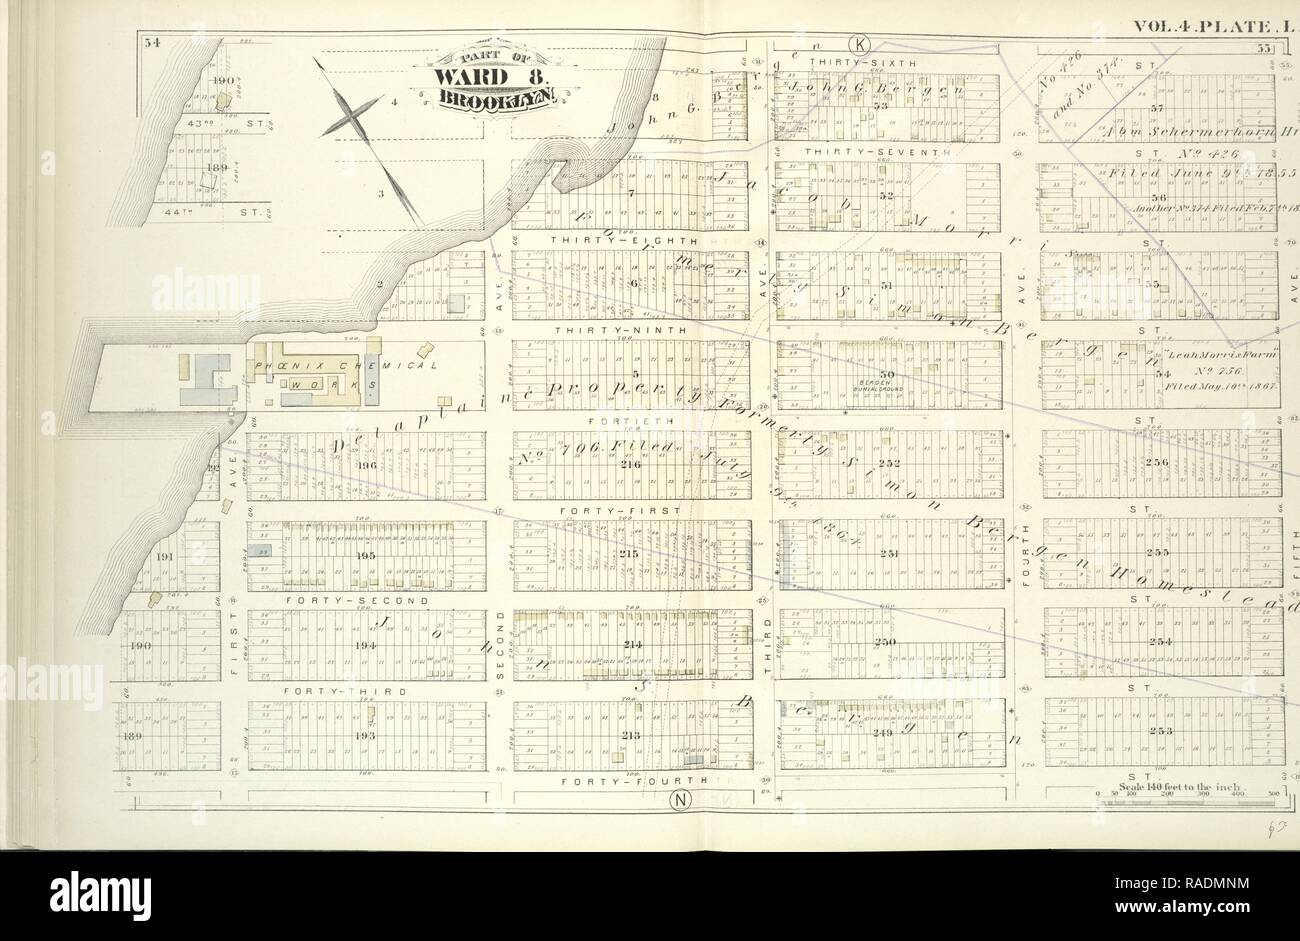 Vol. 4. Plate, L. Map bound by Thirty-Sixth, Fifth Ave., Forty-Fourth St., Gowanus Bay, Including Third St., Forty- reimagined Stock Photo